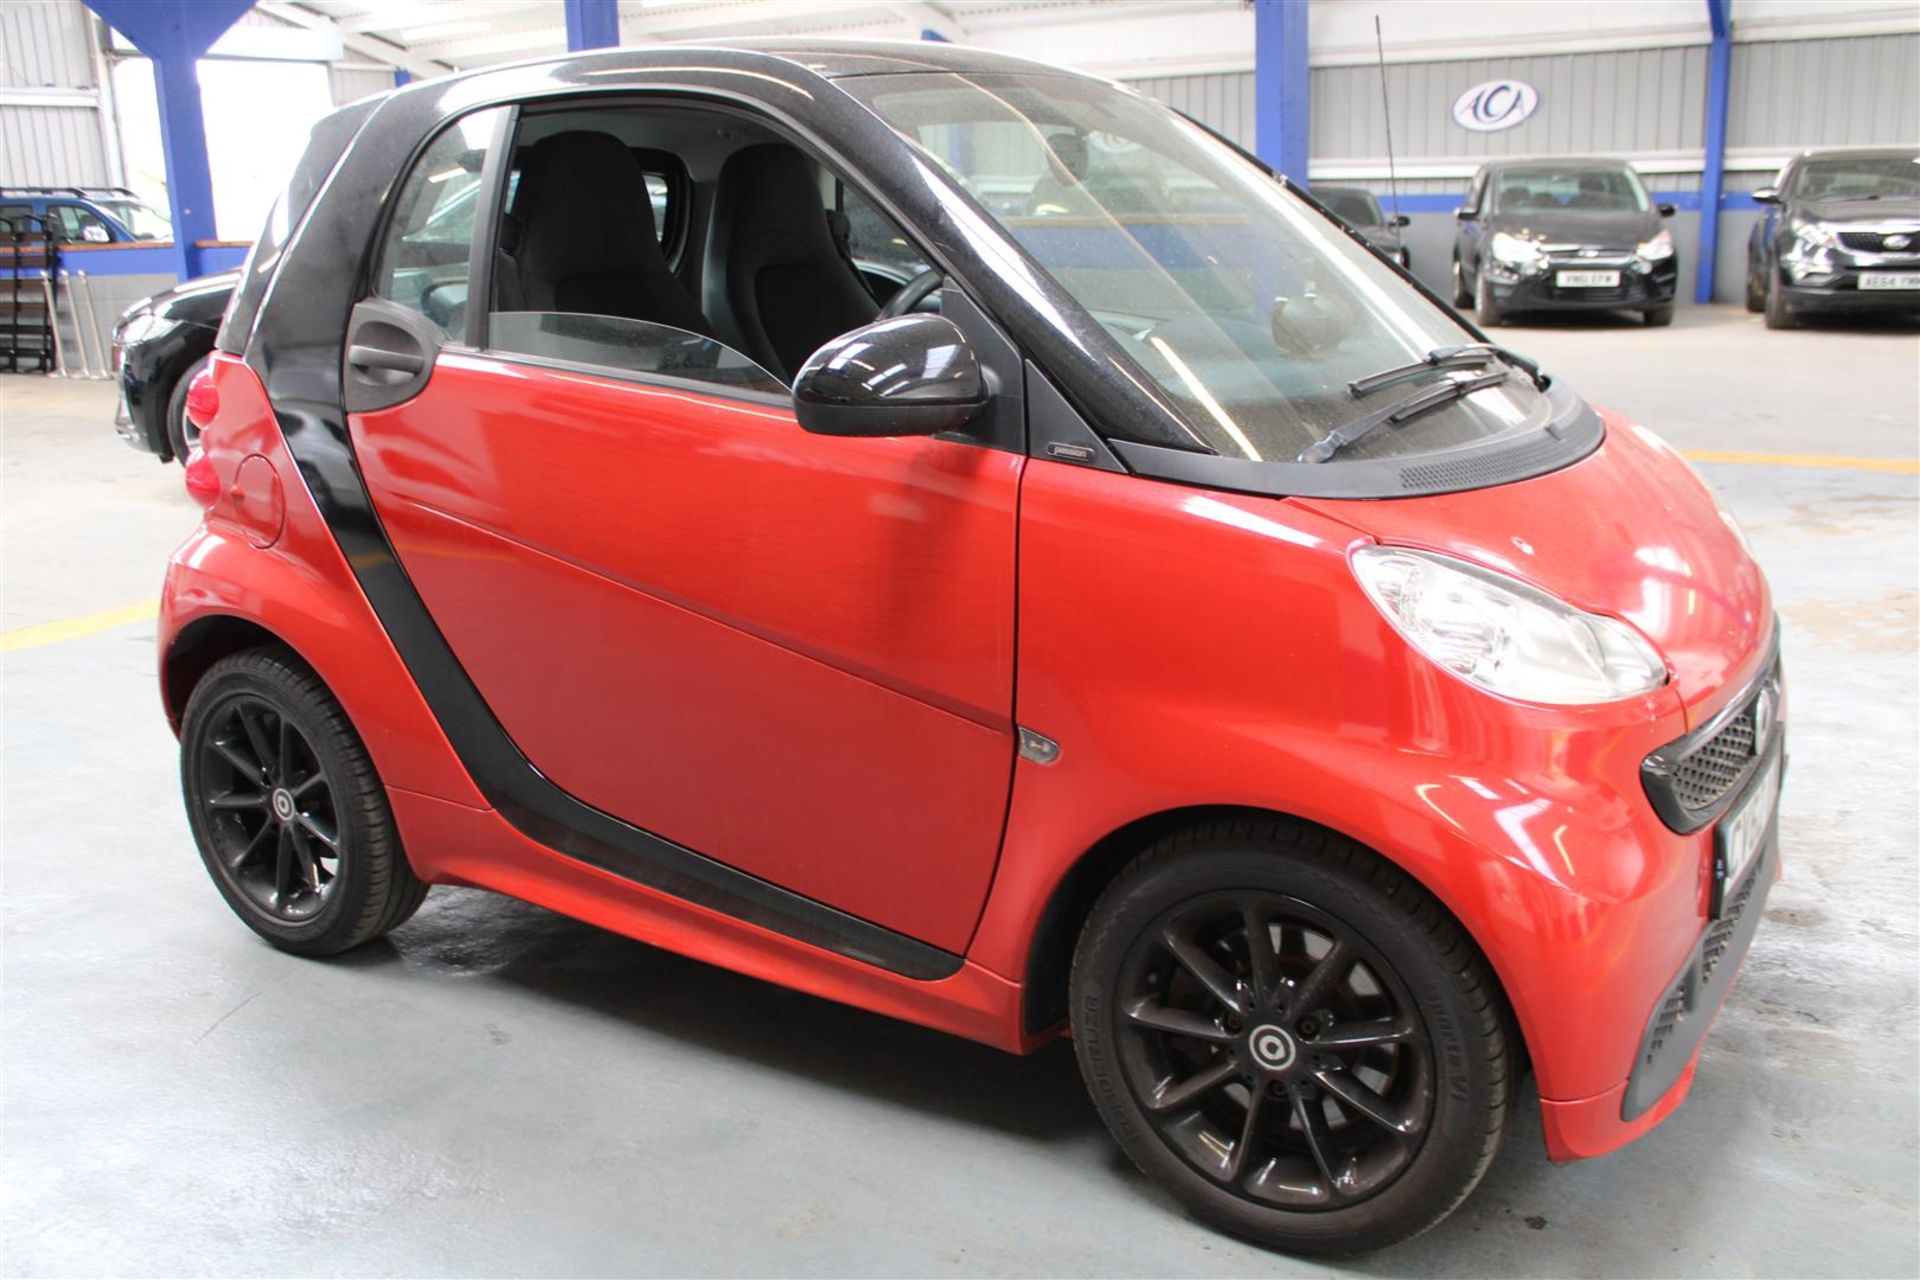 62 12 Smart Fortwo Passion MHD - Image 21 of 27